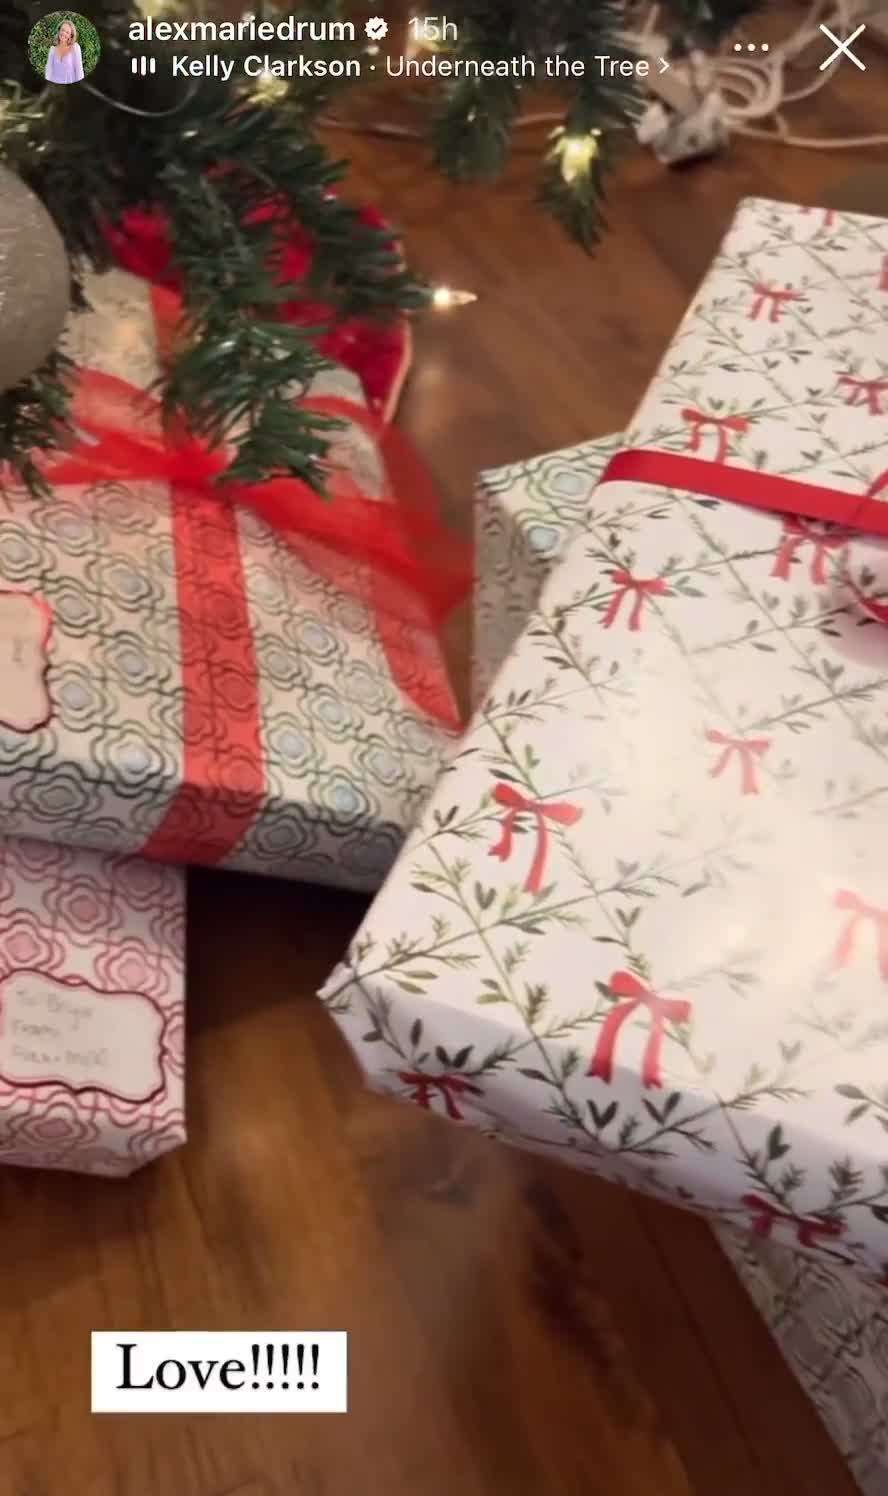 Where to Buy the Christmas Wrapping Paper Alex Drummond Uses